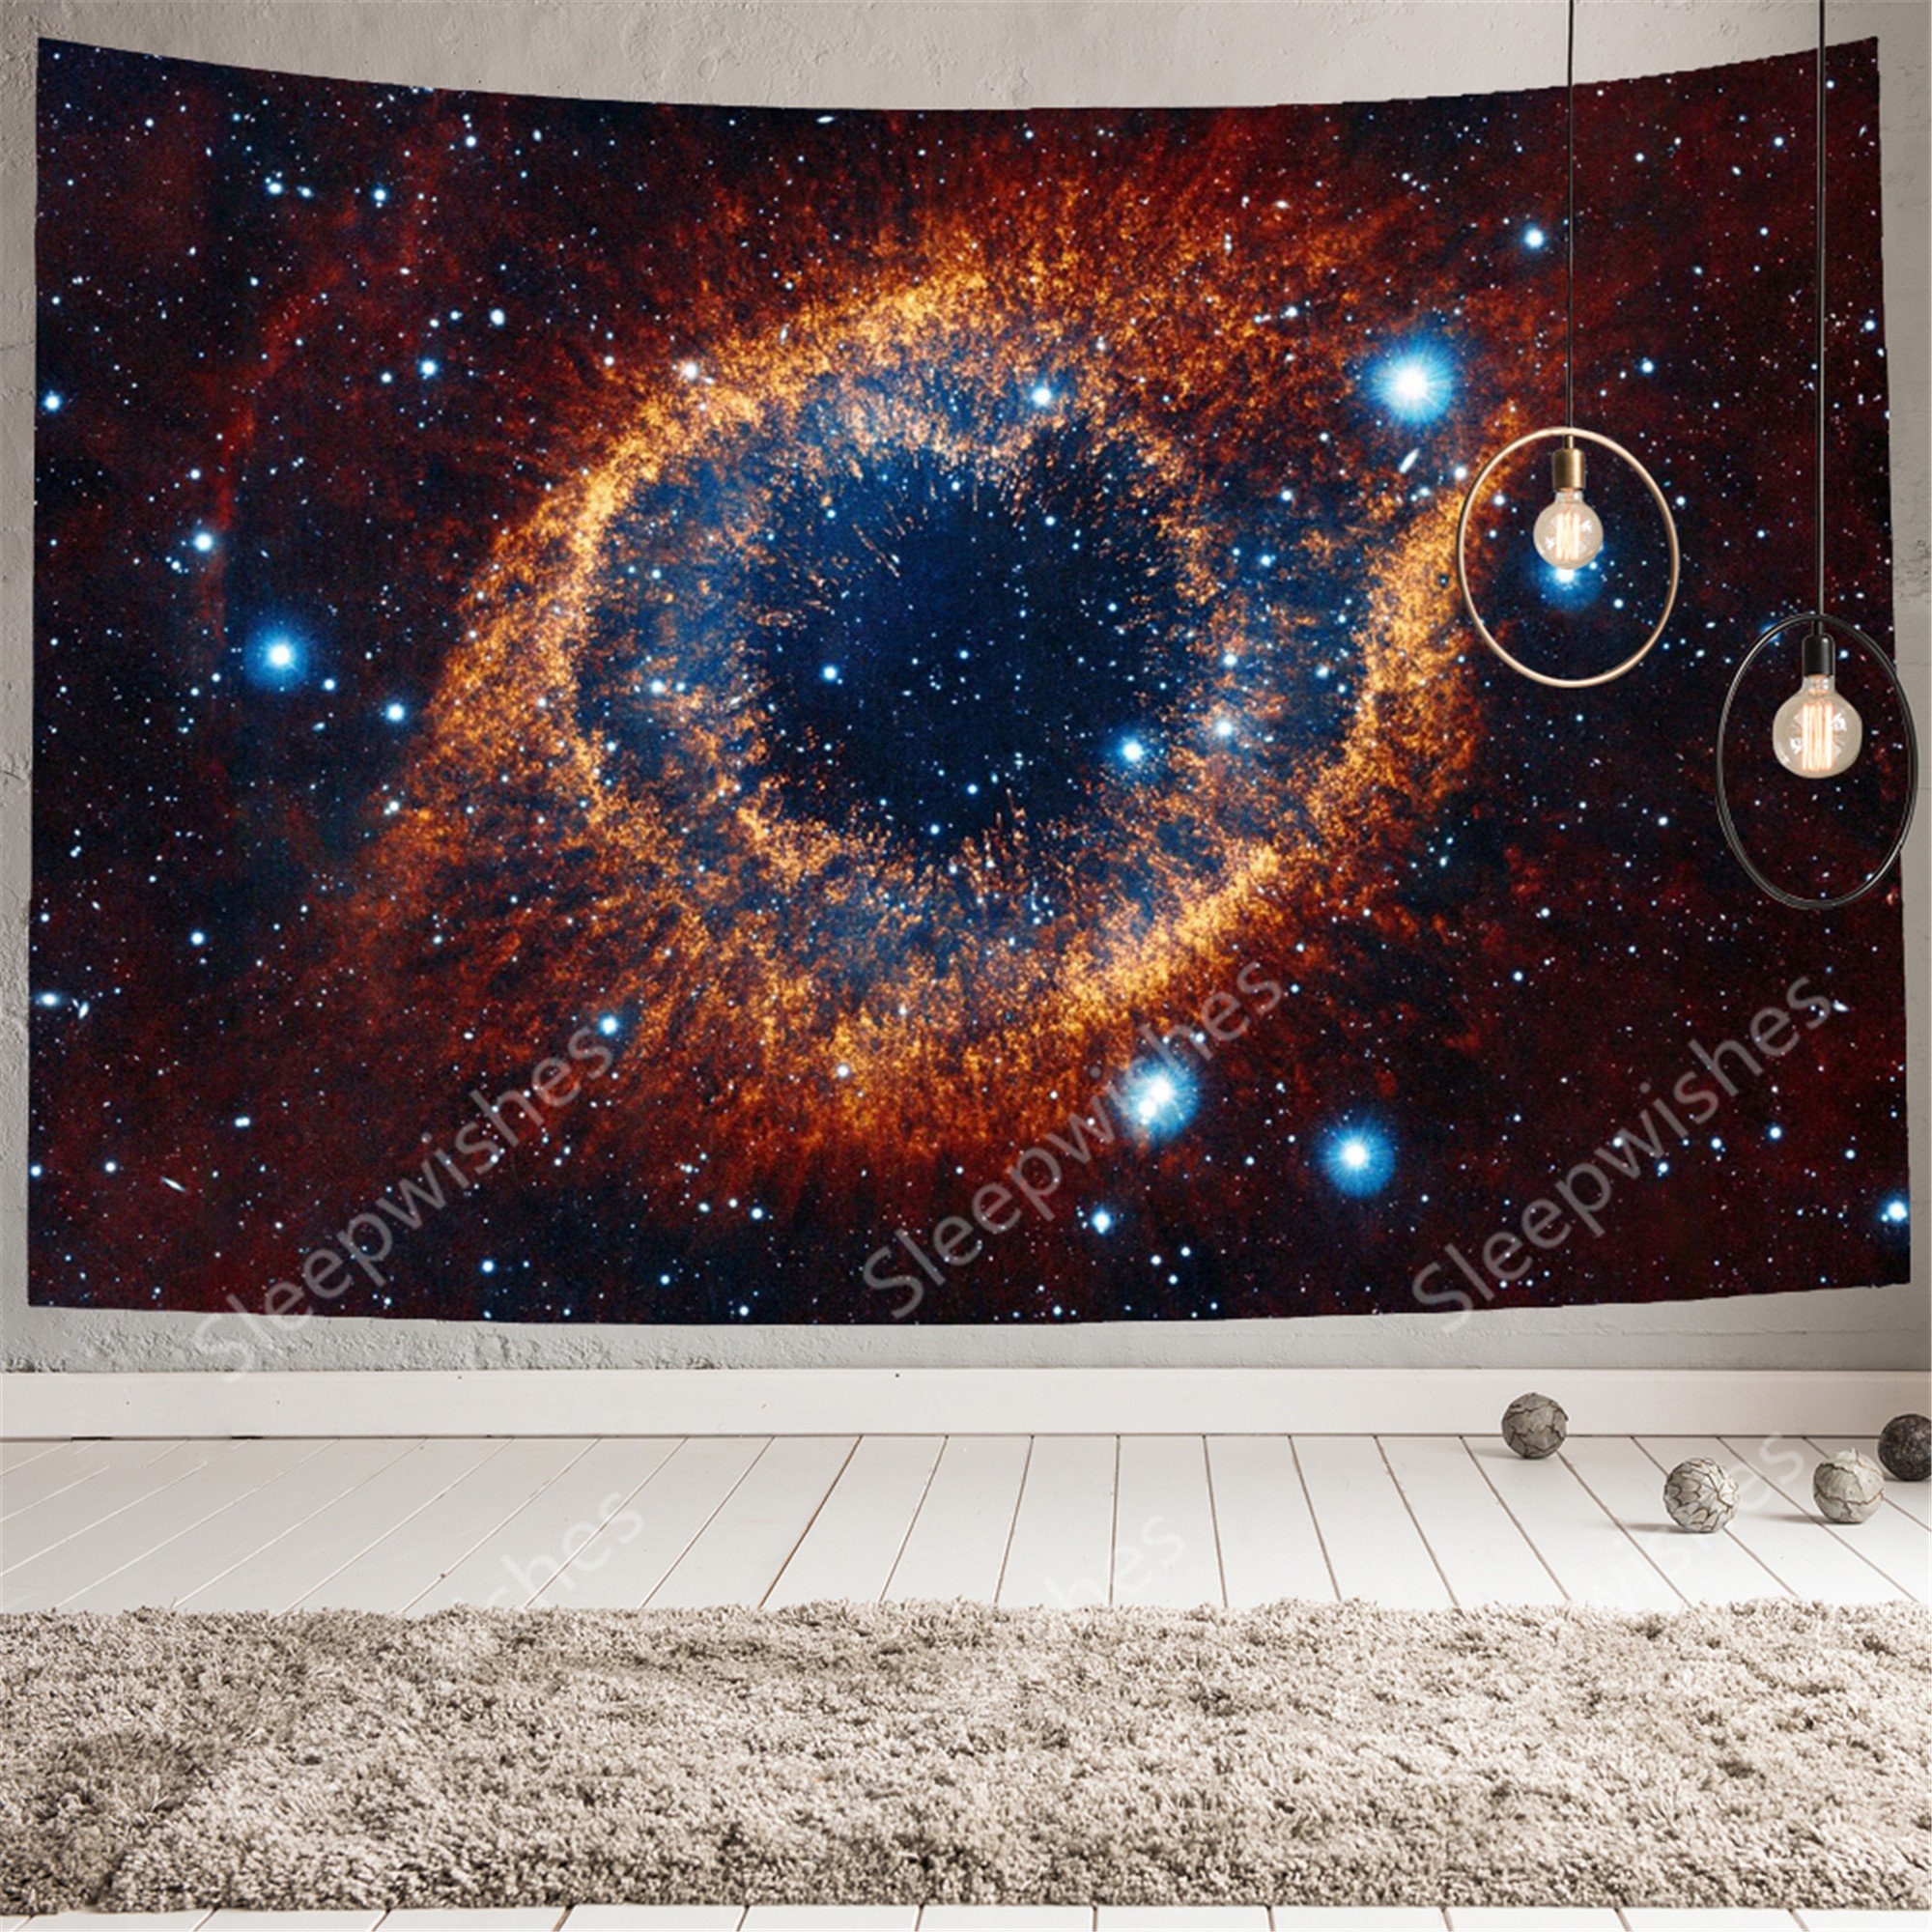 Space Universe Galaxy and Star in Outer Space Tapestries Wall Hangings for Living Room Bedroom Dorm Colorful 60 x 40 Inch Goodbath Small Tapstry